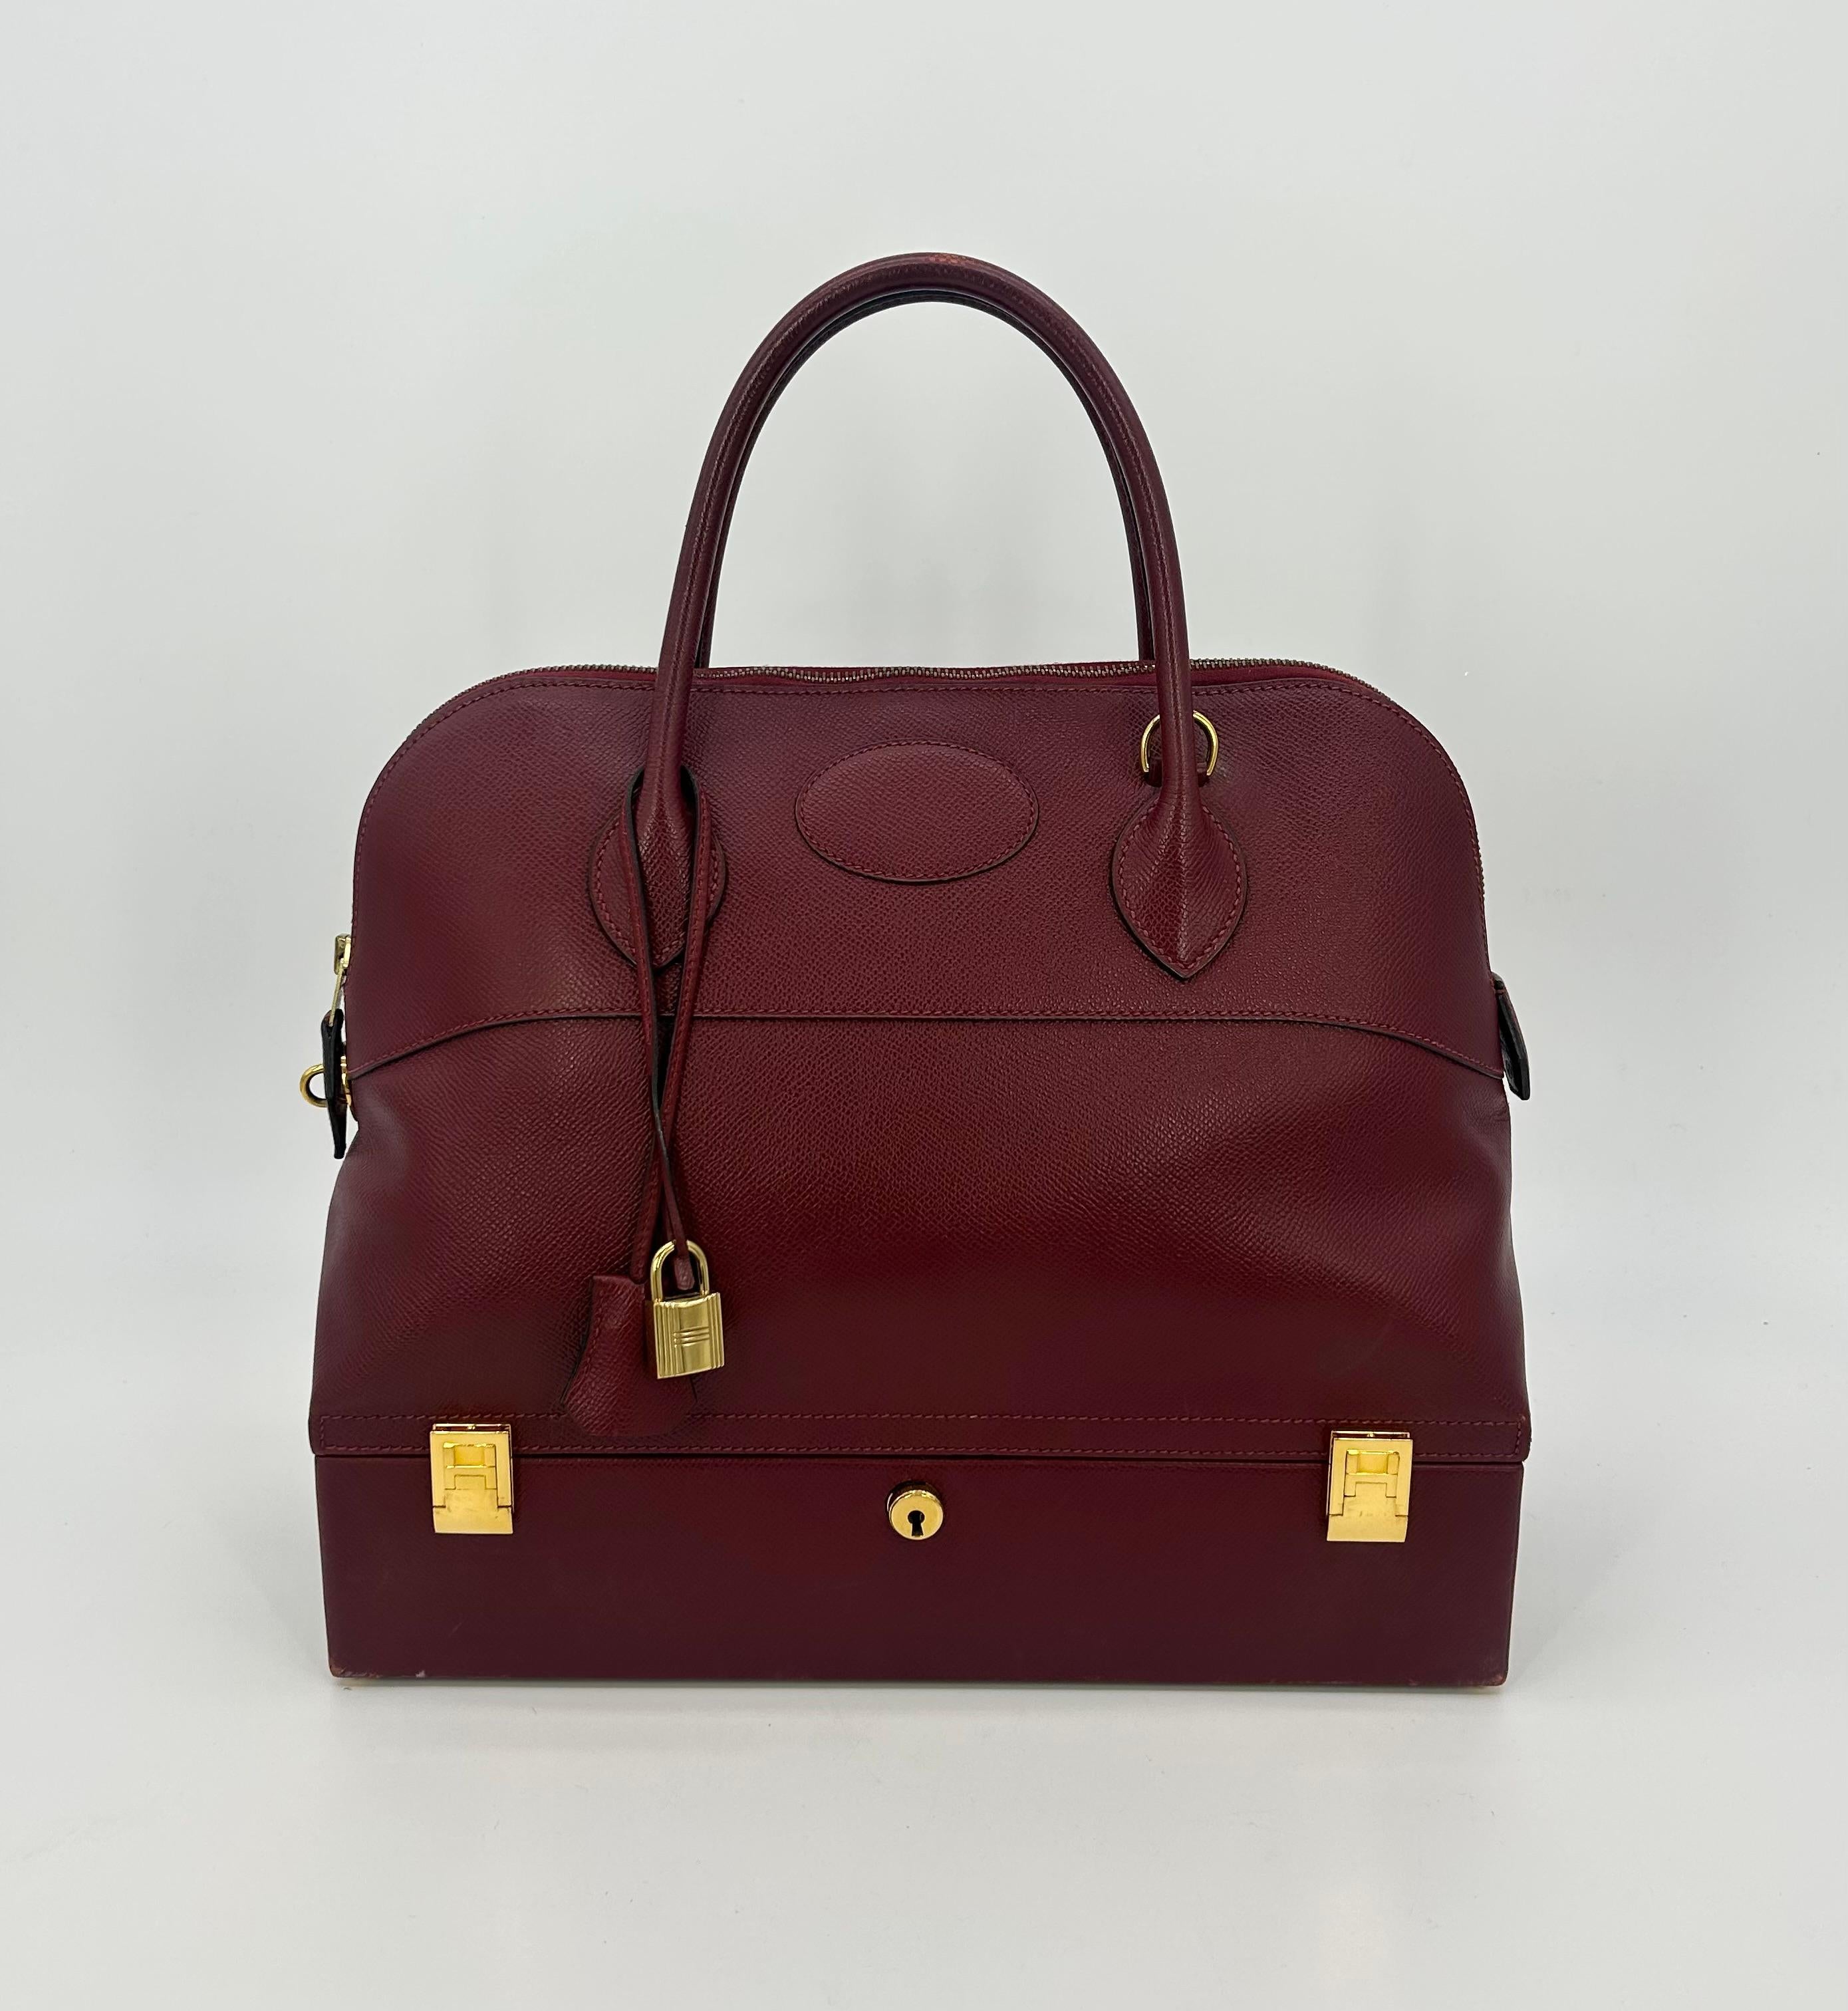 Hermes Rouge Epsom Leather Macpherson Bag c1990s in good condition. Rouge red epsom leather exterior trimmed with gold hardware. Top handle and removable shoulder strap easily converts between hand and shoulder styles to suit any occasion. Top zip